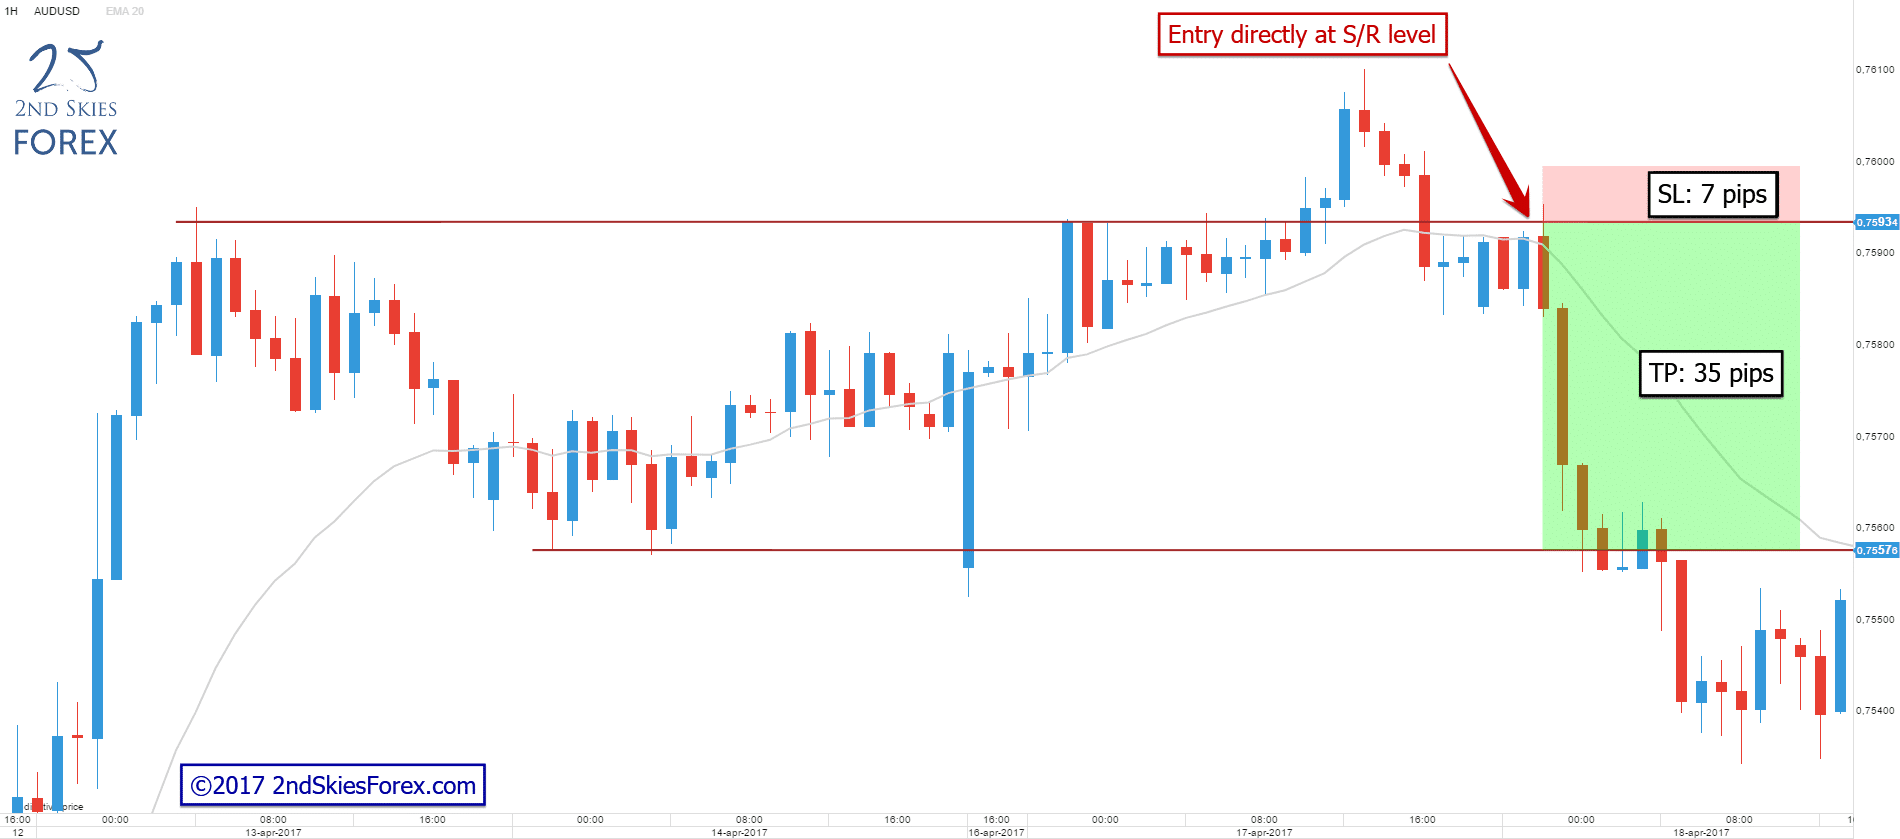 Trading Engulfing Bars - Entry at resistance